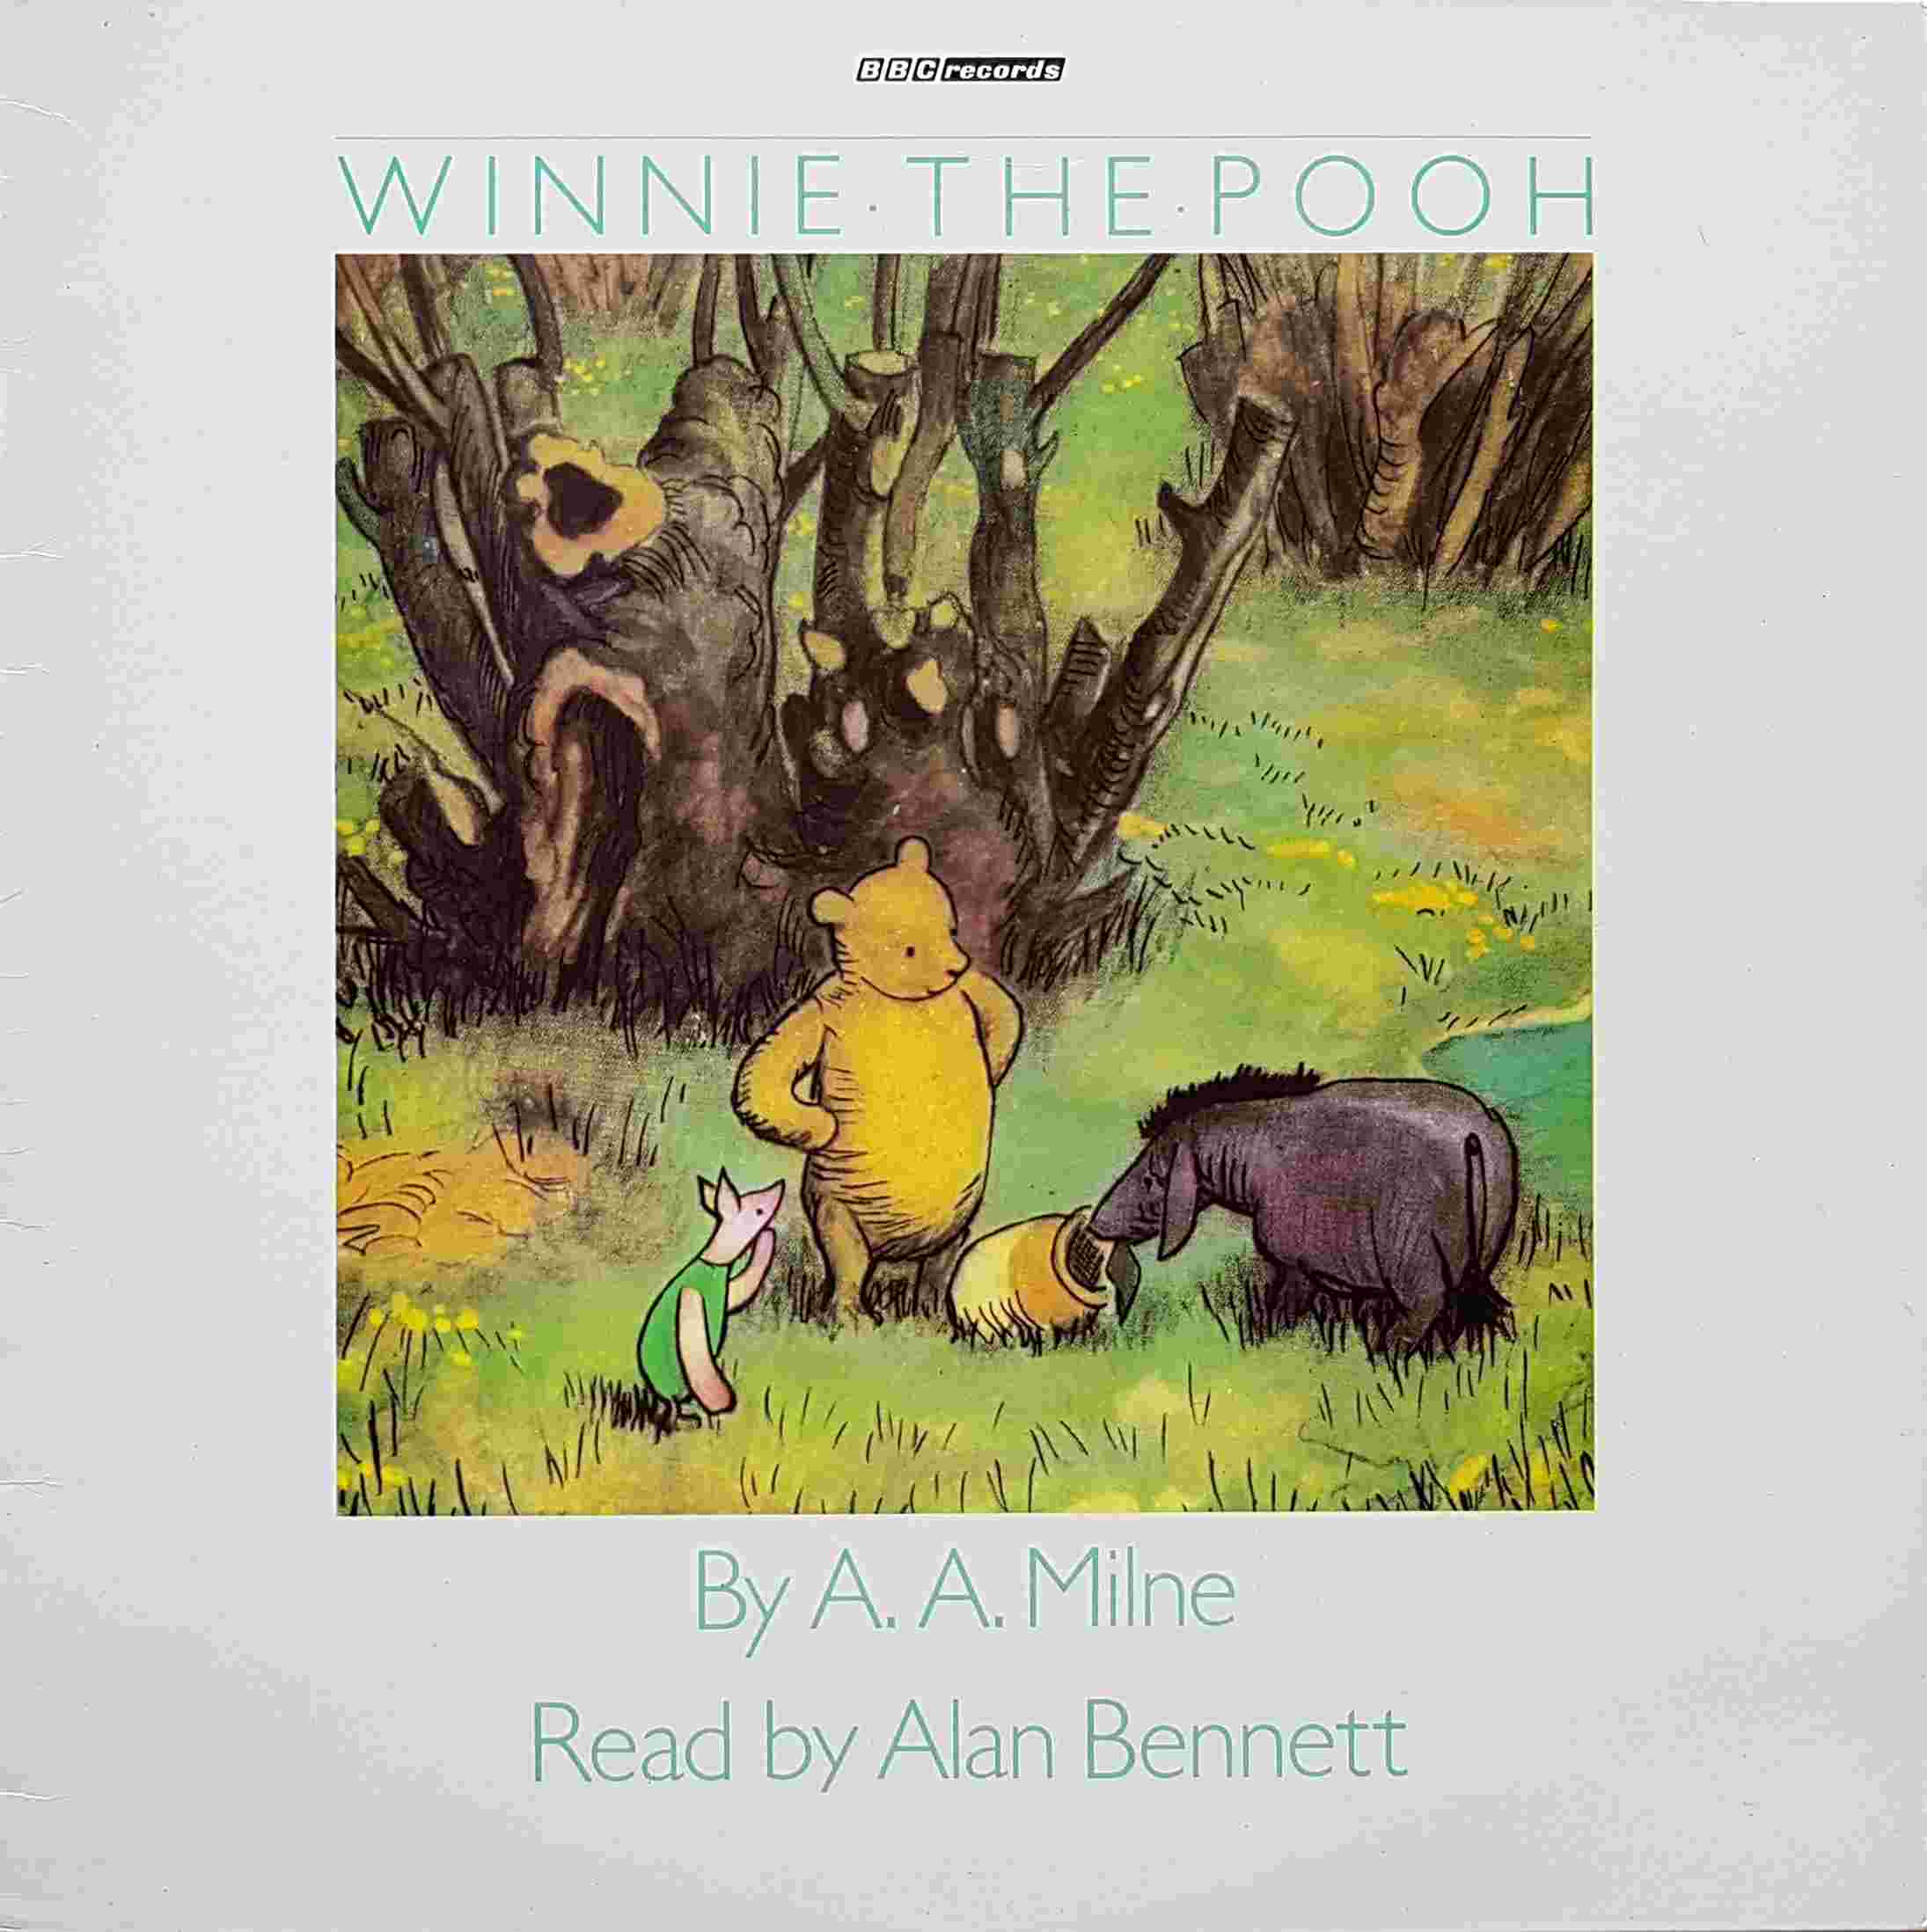 Picture of REC 528 Winnie the Pooh by artist A. A. Milne from the BBC albums - Records and Tapes library